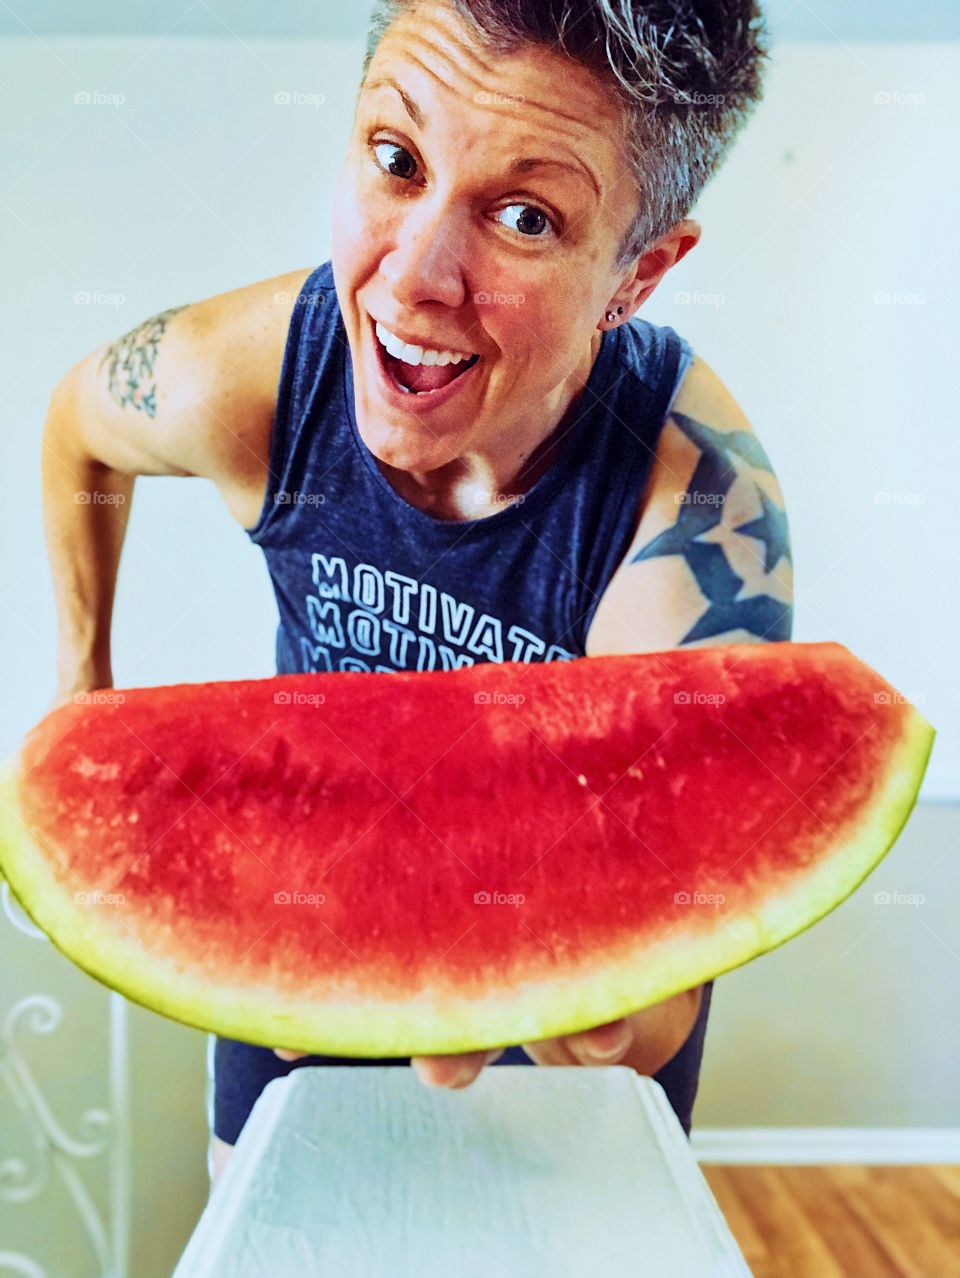 Woman With Large Watermelon, Funny Girl Portrait, Farm Fresh Fruits, Summertime Fruits, Serving Watermelon 